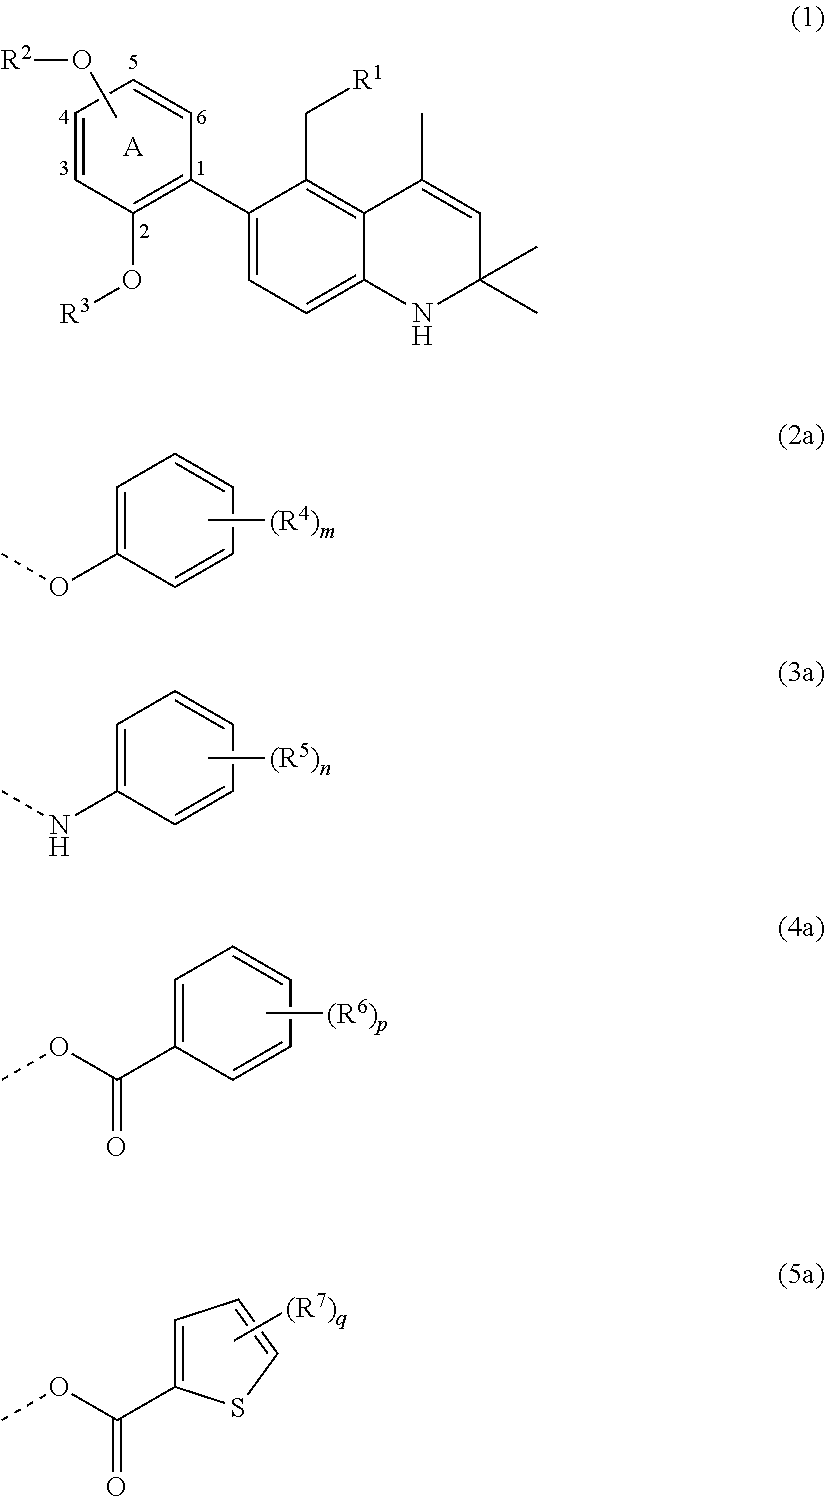 Glucocorticoid receptor agonist comprising 2,2,4-trimethyl-6-phenyl-1,2-dihydroquinoline derivatives having substituted oxy group